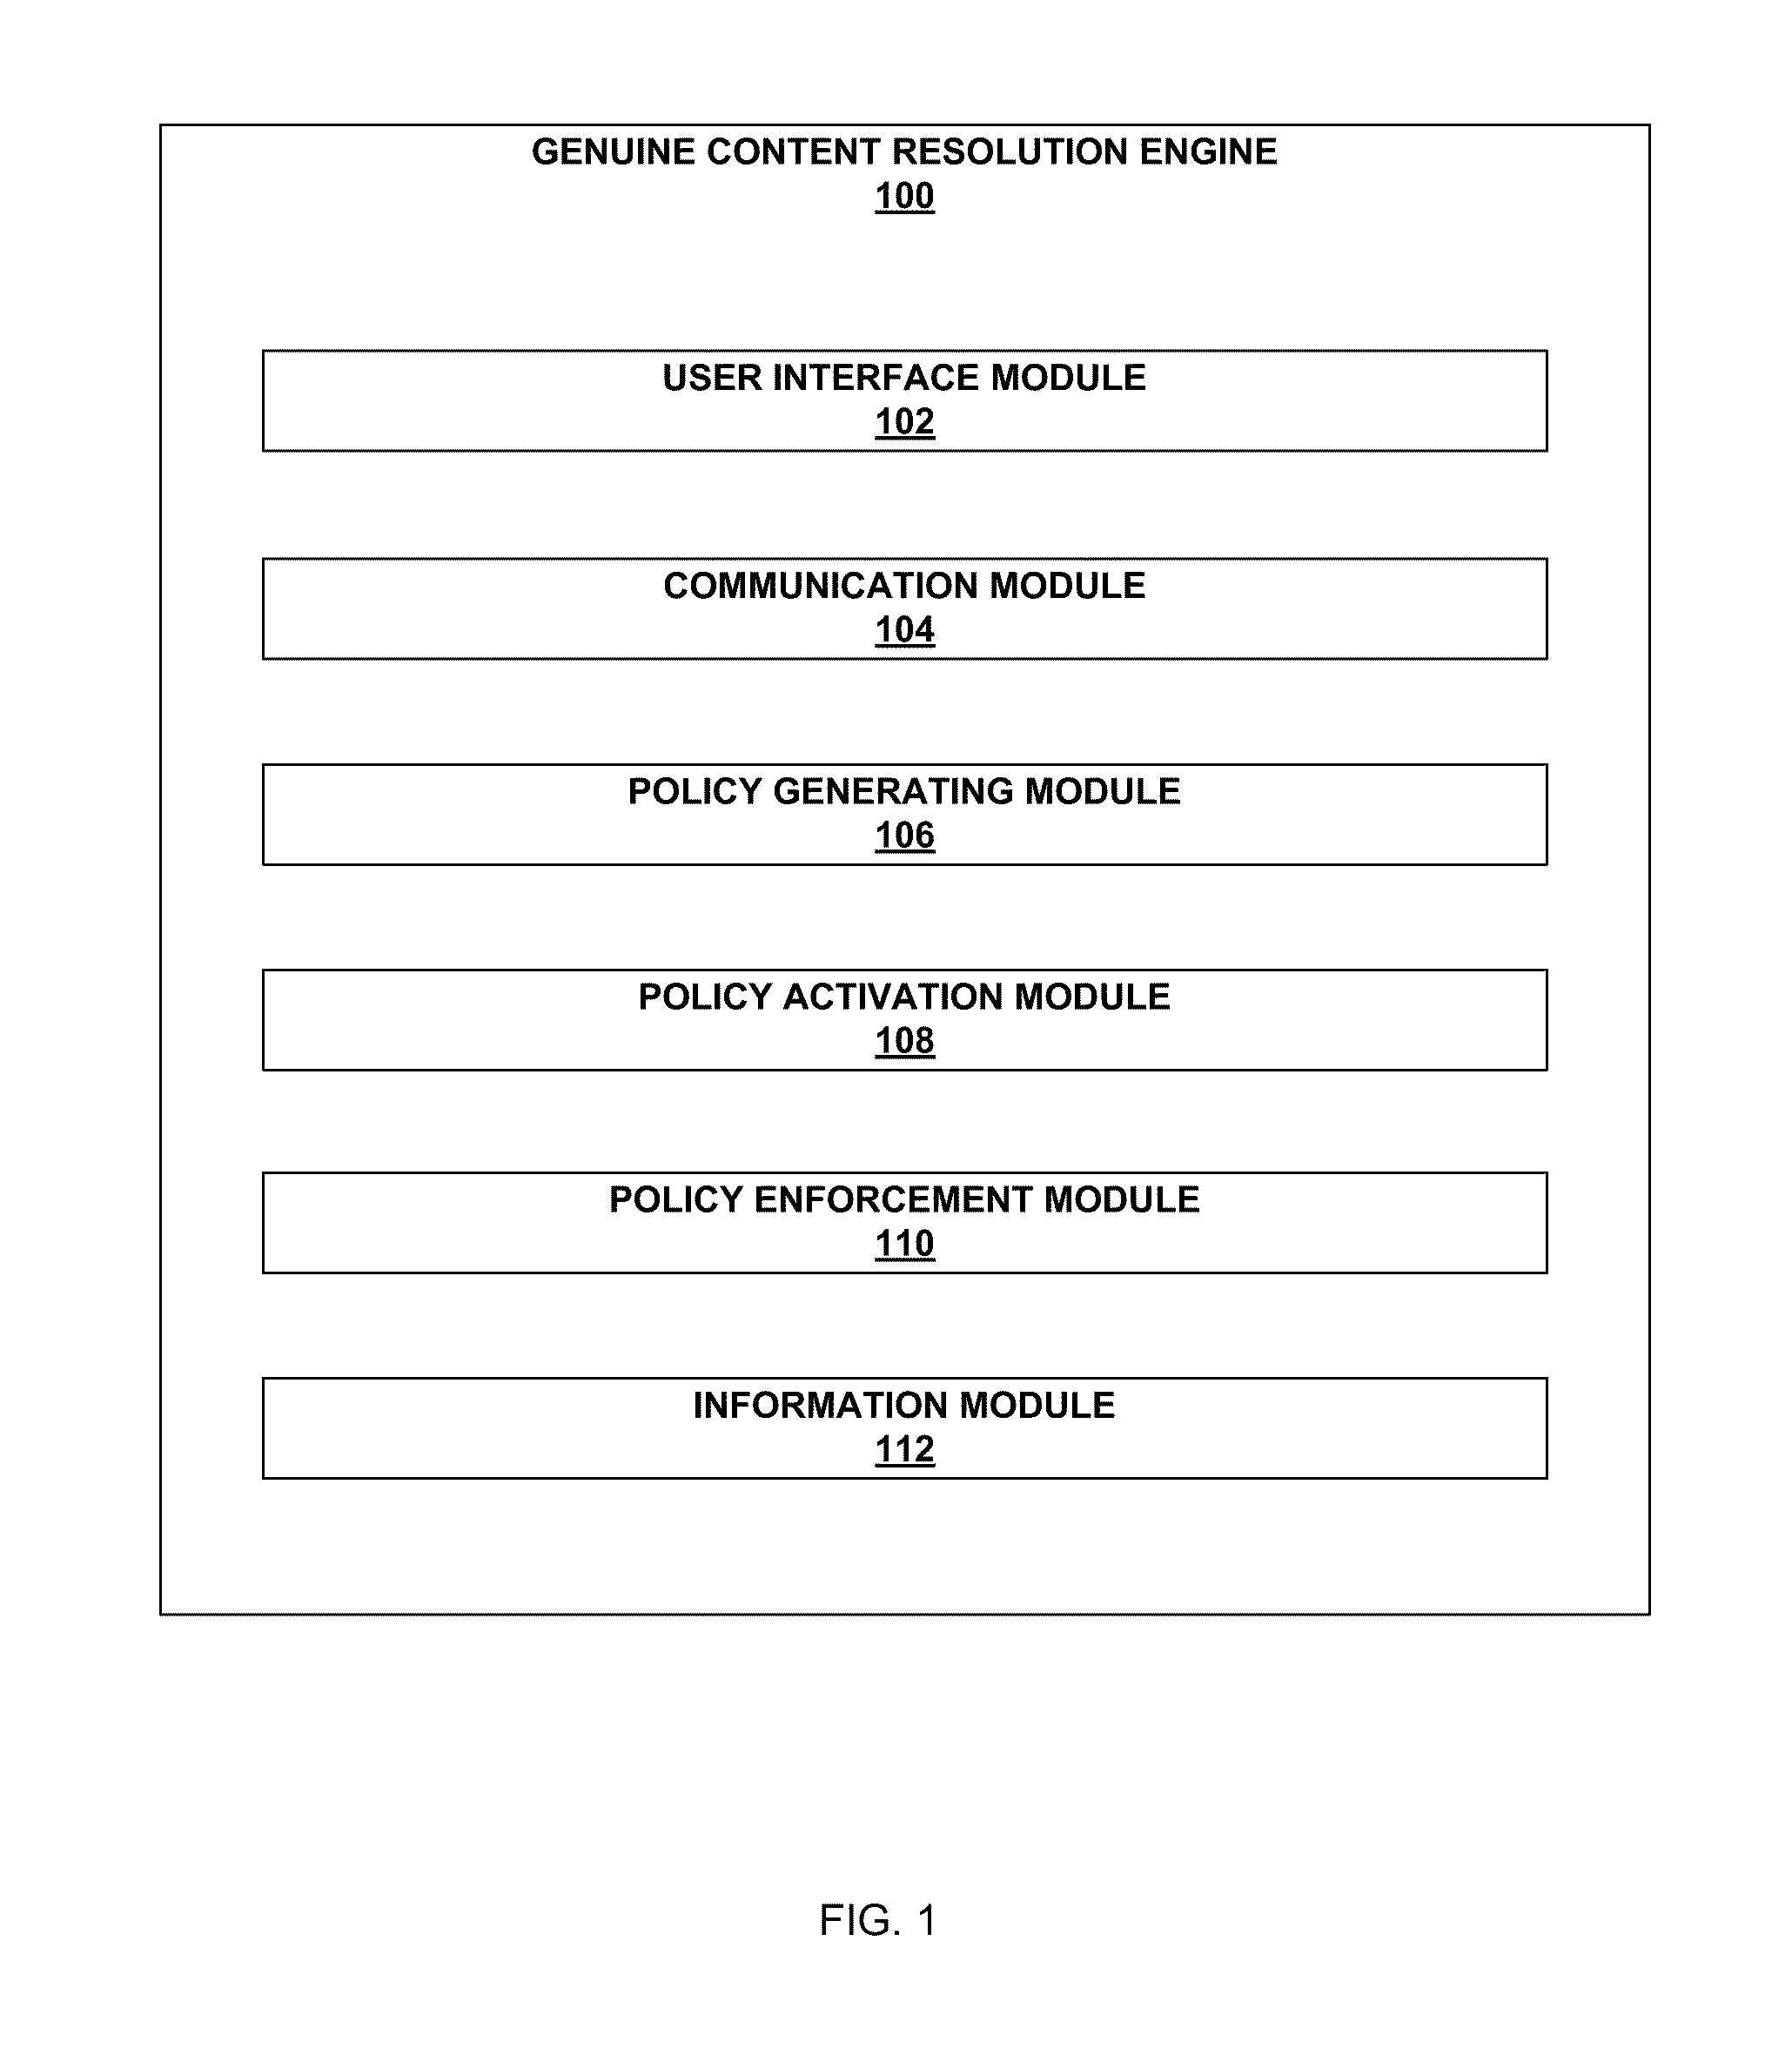 Systems and methods for redirection of online queries to genuine content